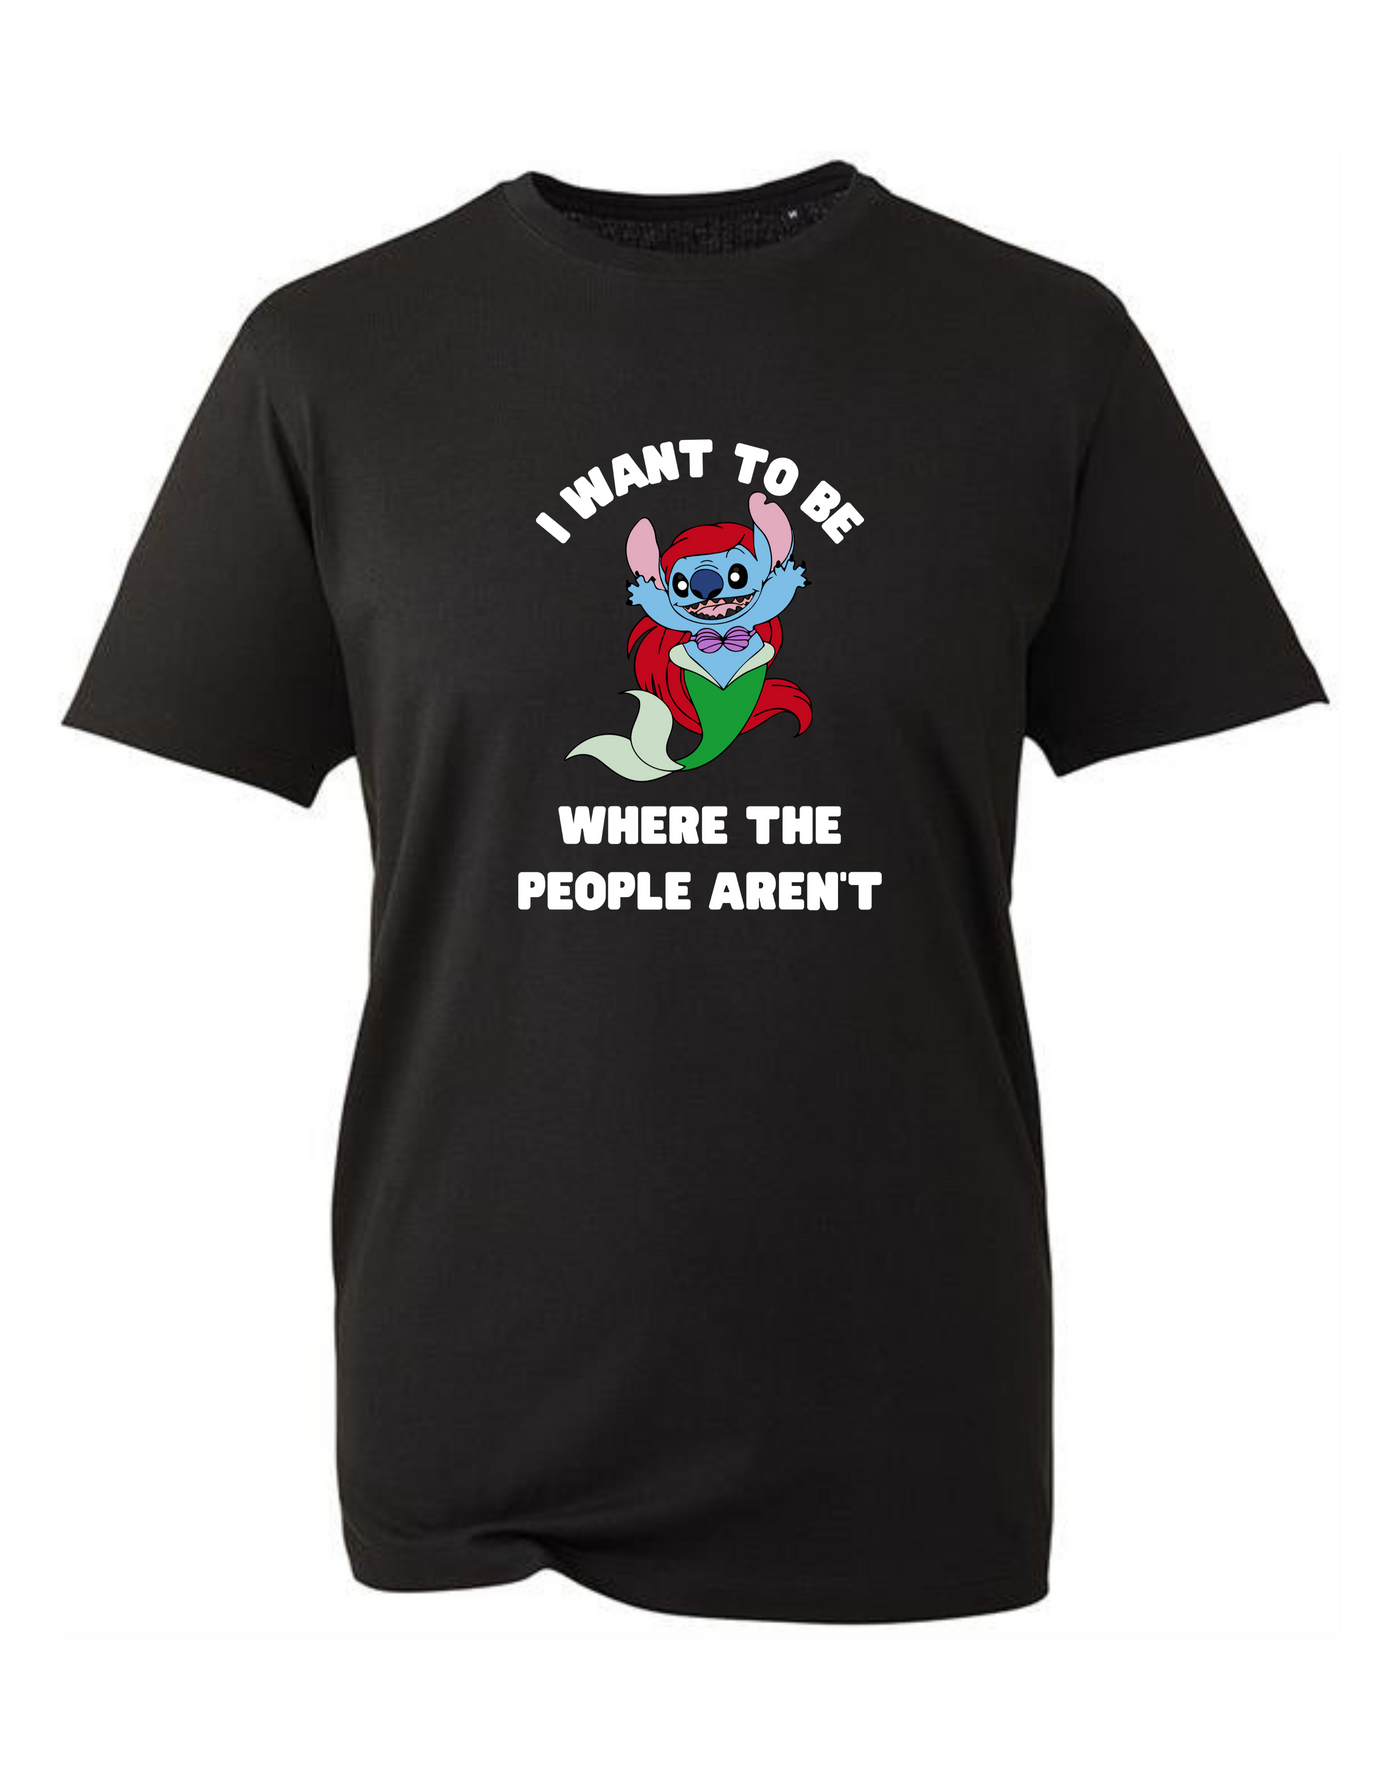 Stitch "Where The People Aren't" Organic T-Shirt